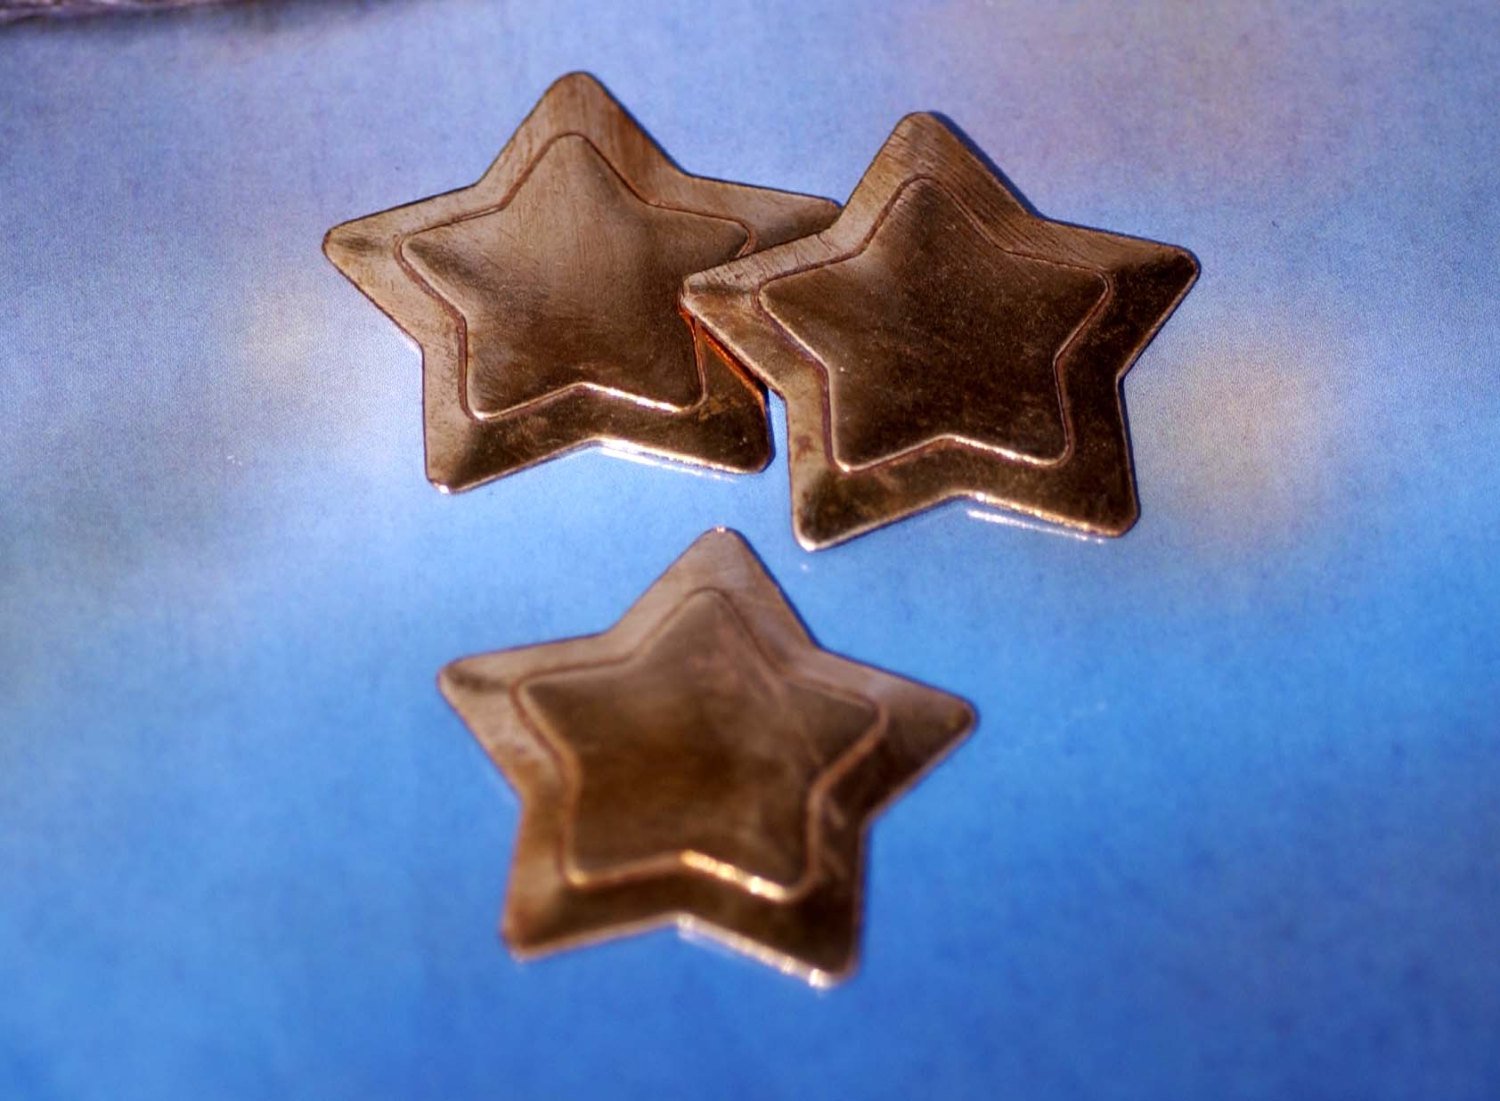 Star in Star 36mm with Embossed Star Blank Cutout for Enameling Stamping Texturing Metalworking Jewelry Making Blanks - 4 pieces